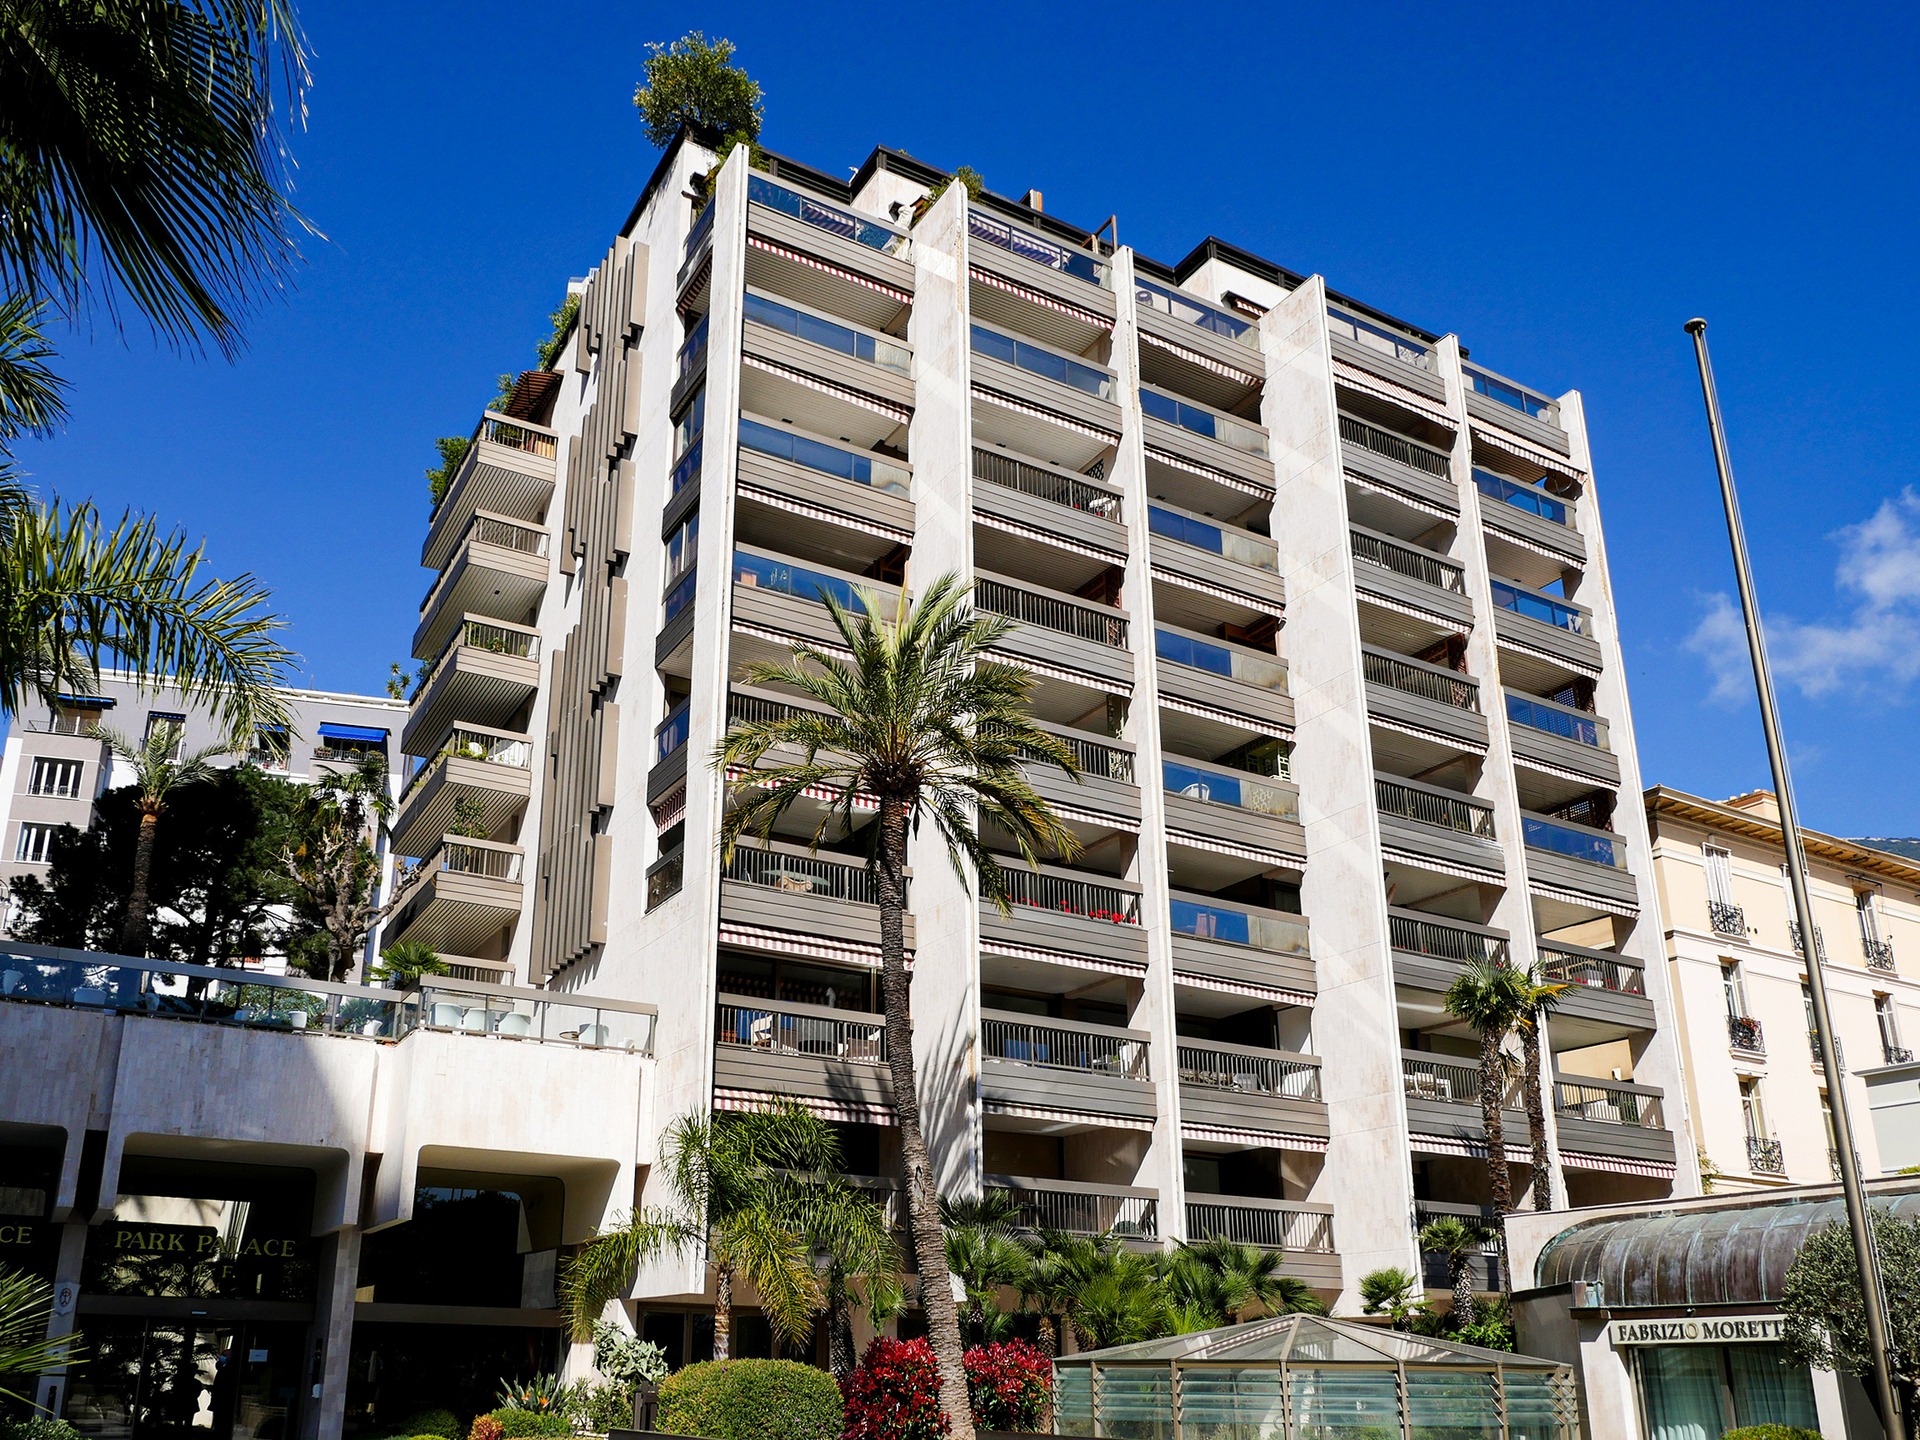 PARK PALACE - 1-BEDROOM FLAT WITH TERRACE - Offices for sale in Monaco